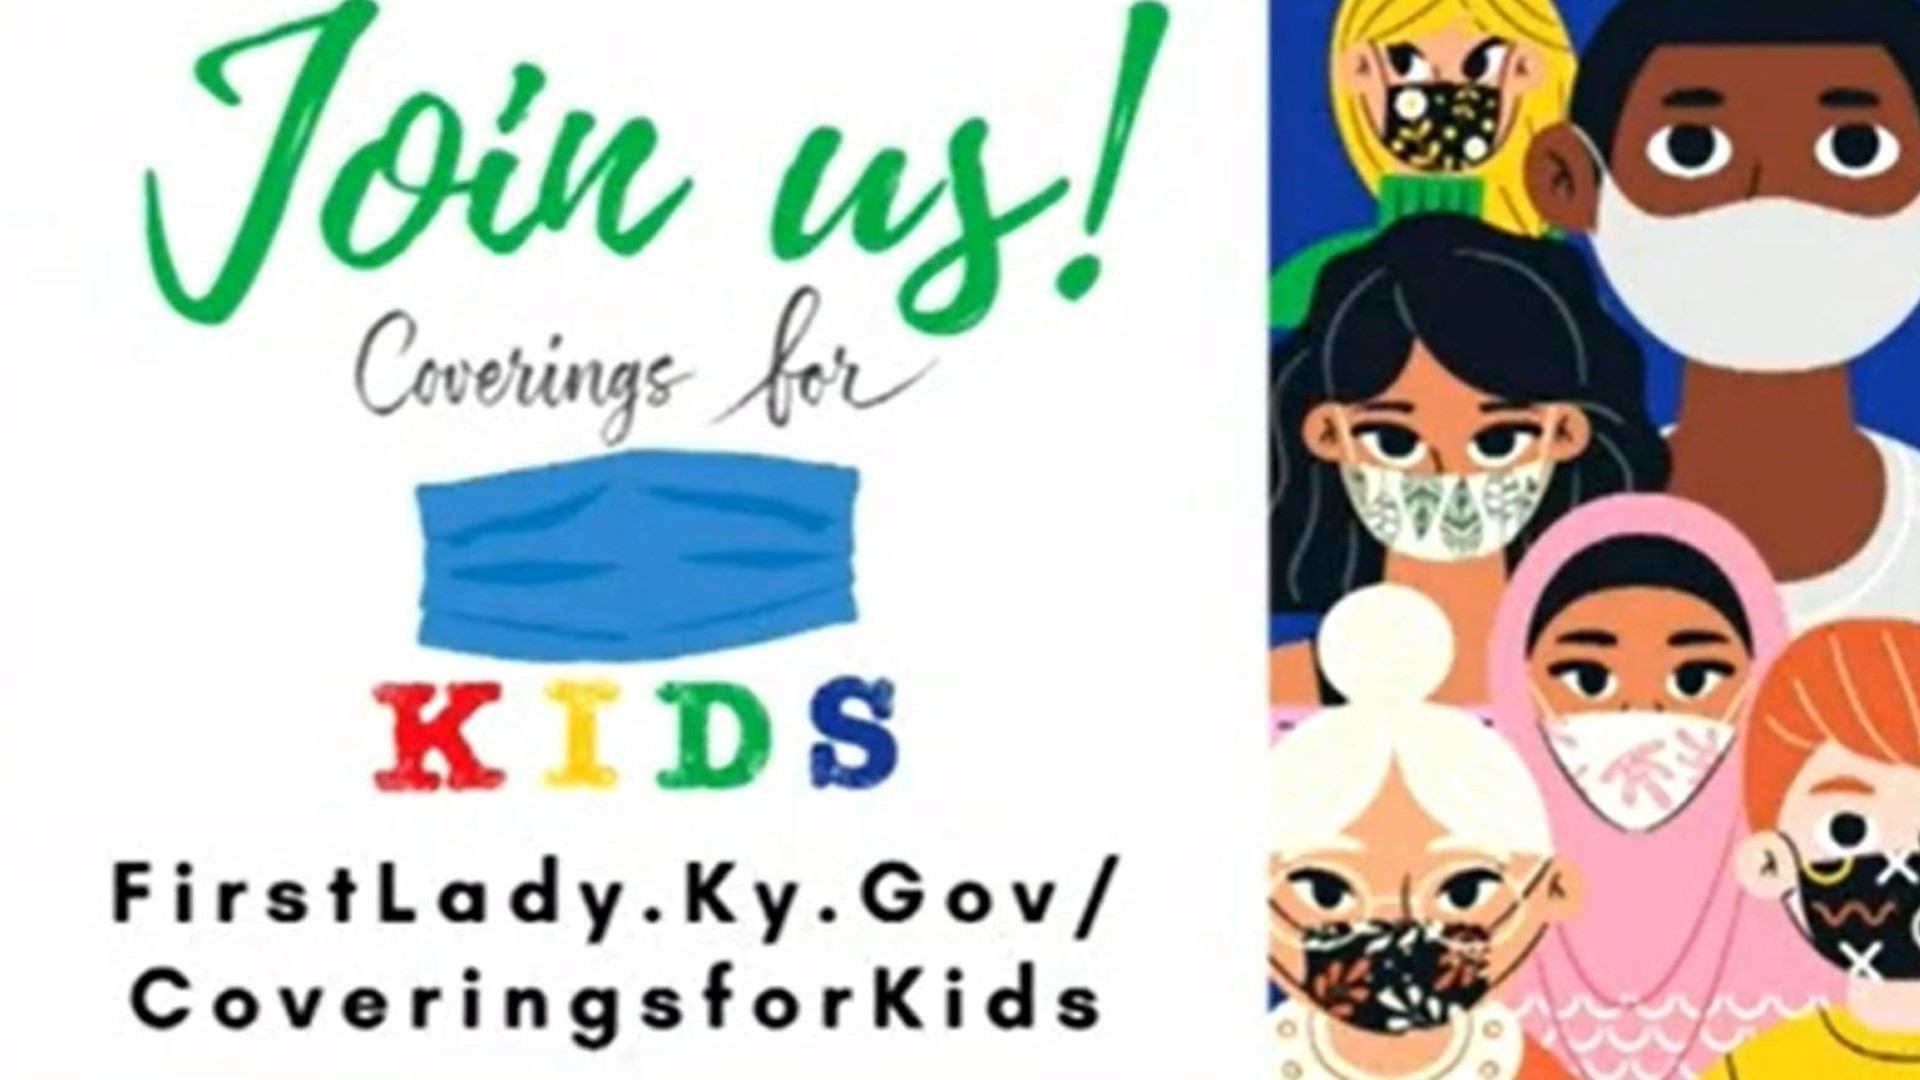 COVID-19 Louisville: Masks for Kids initiative to help schools reopen